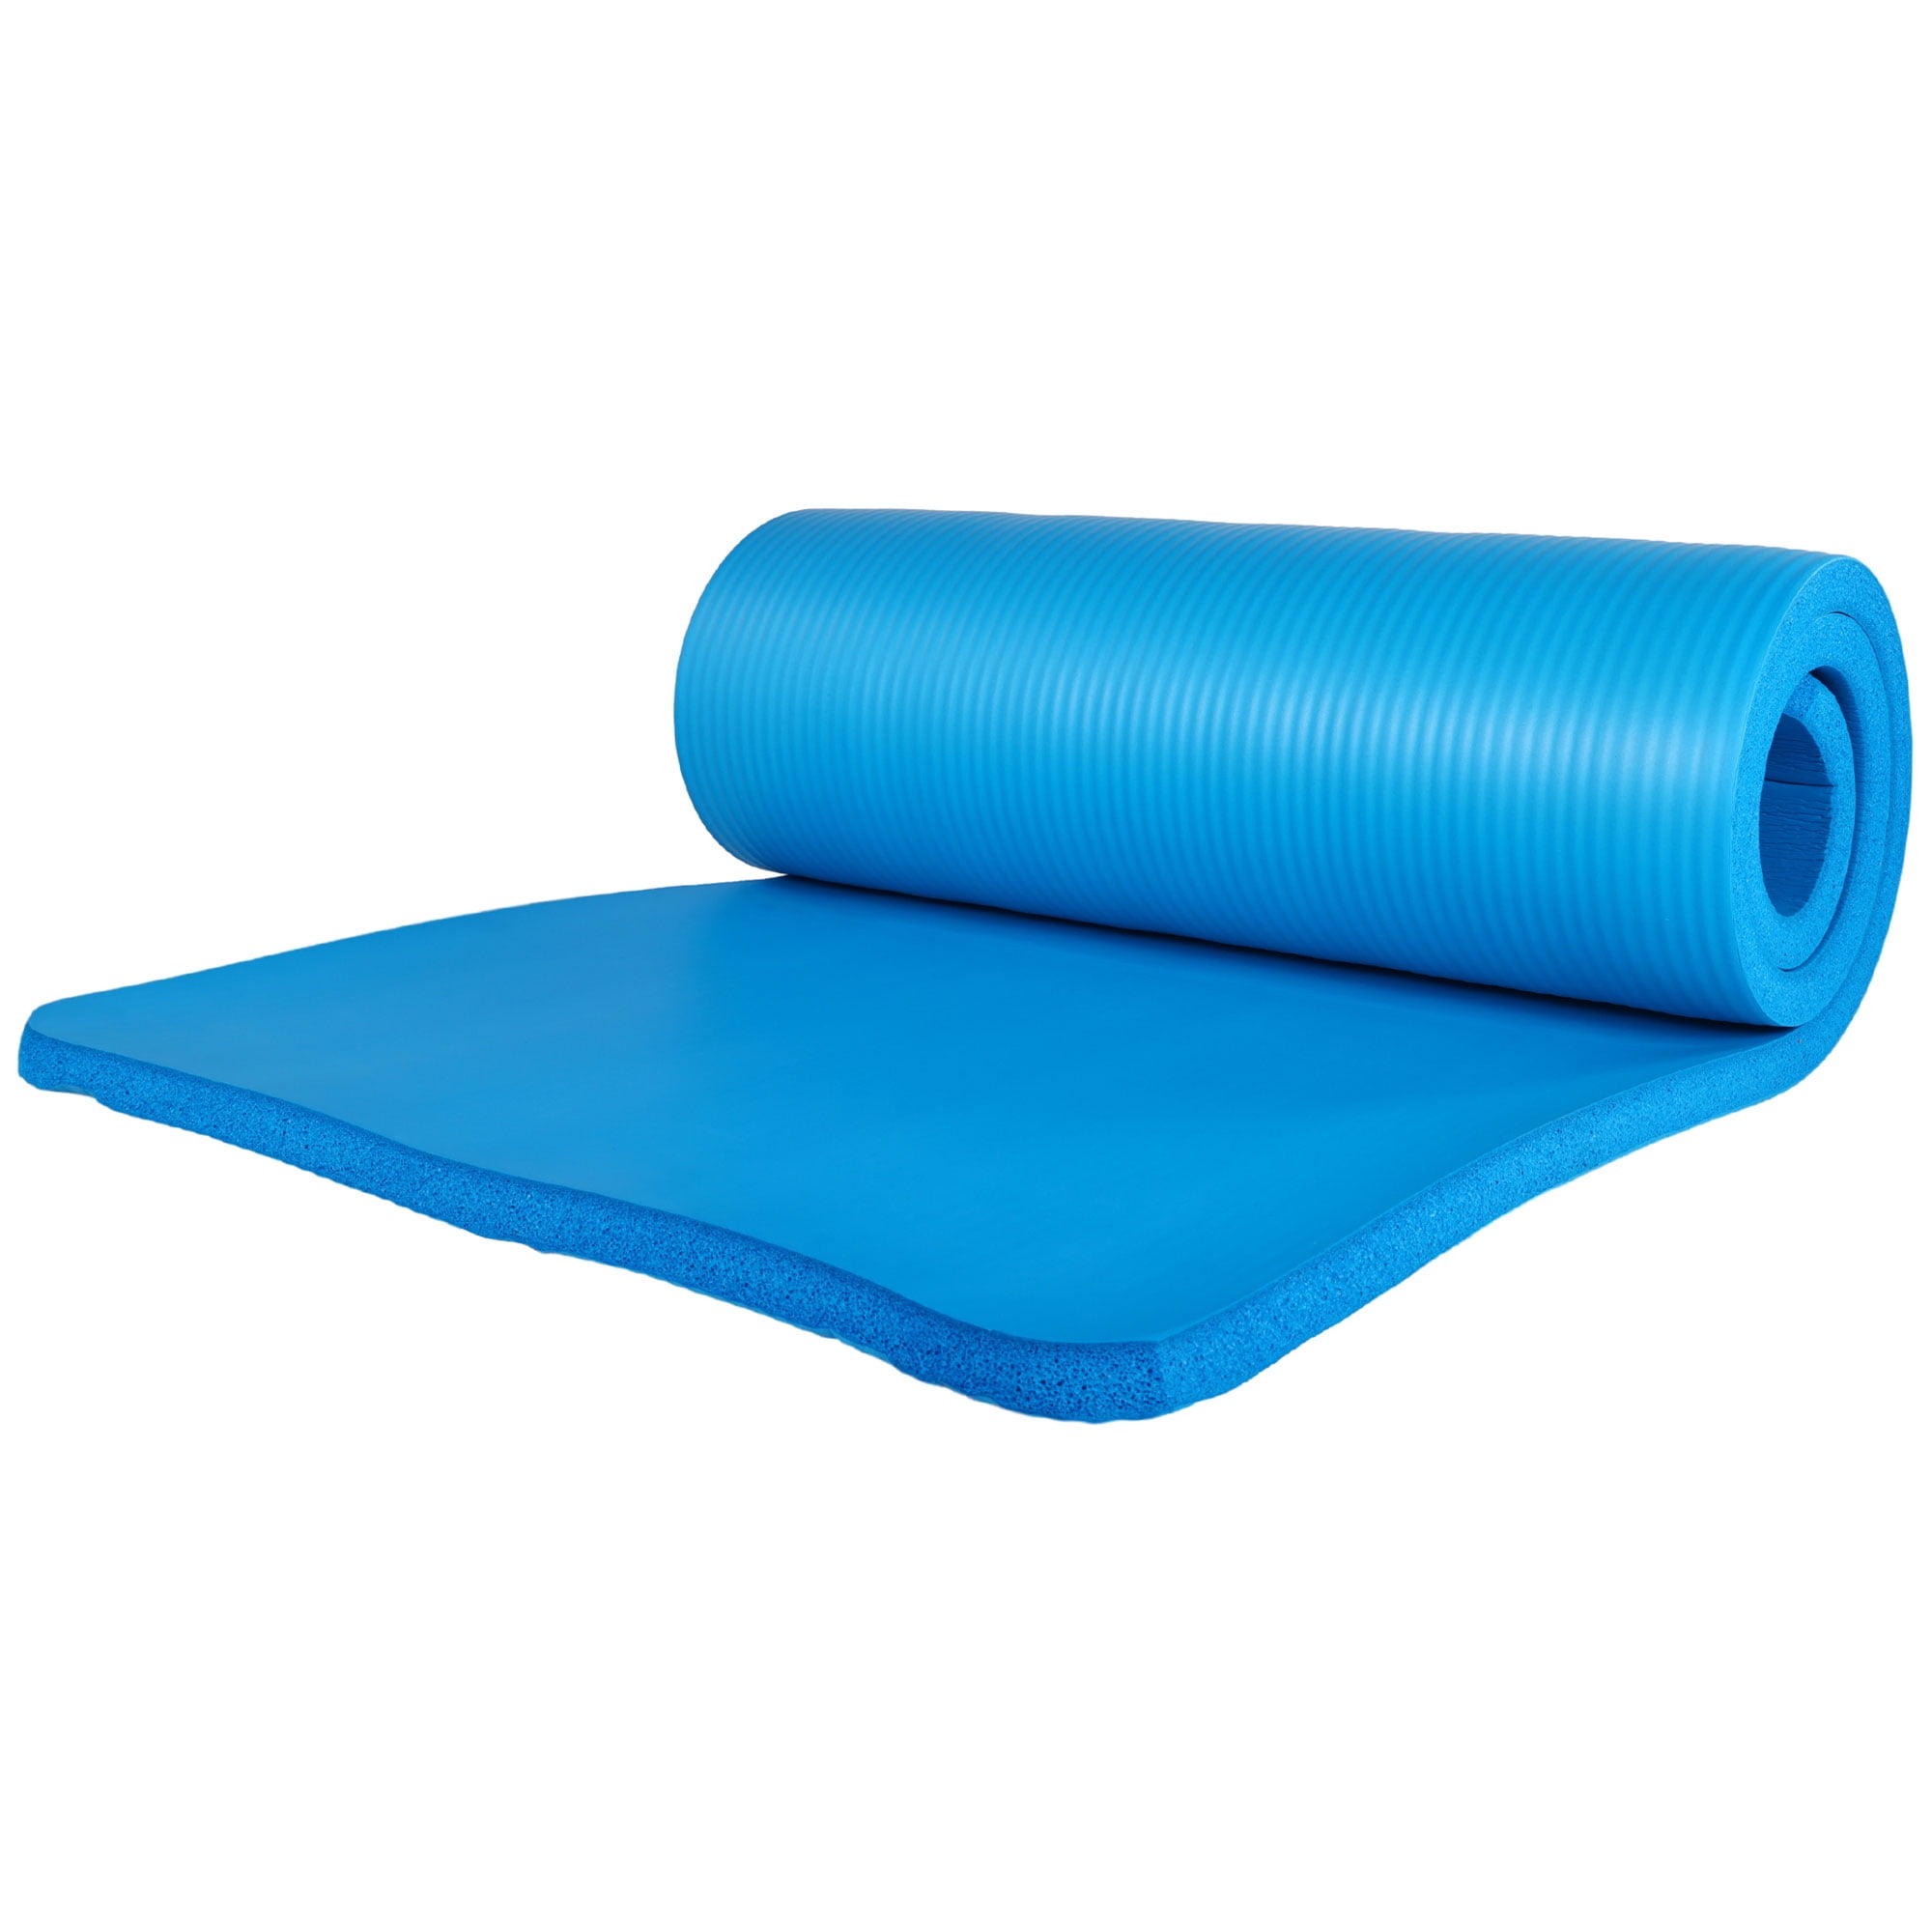 Viral BalanceFrom Fitness Mat NOW On Sale For $99.99! You Don't